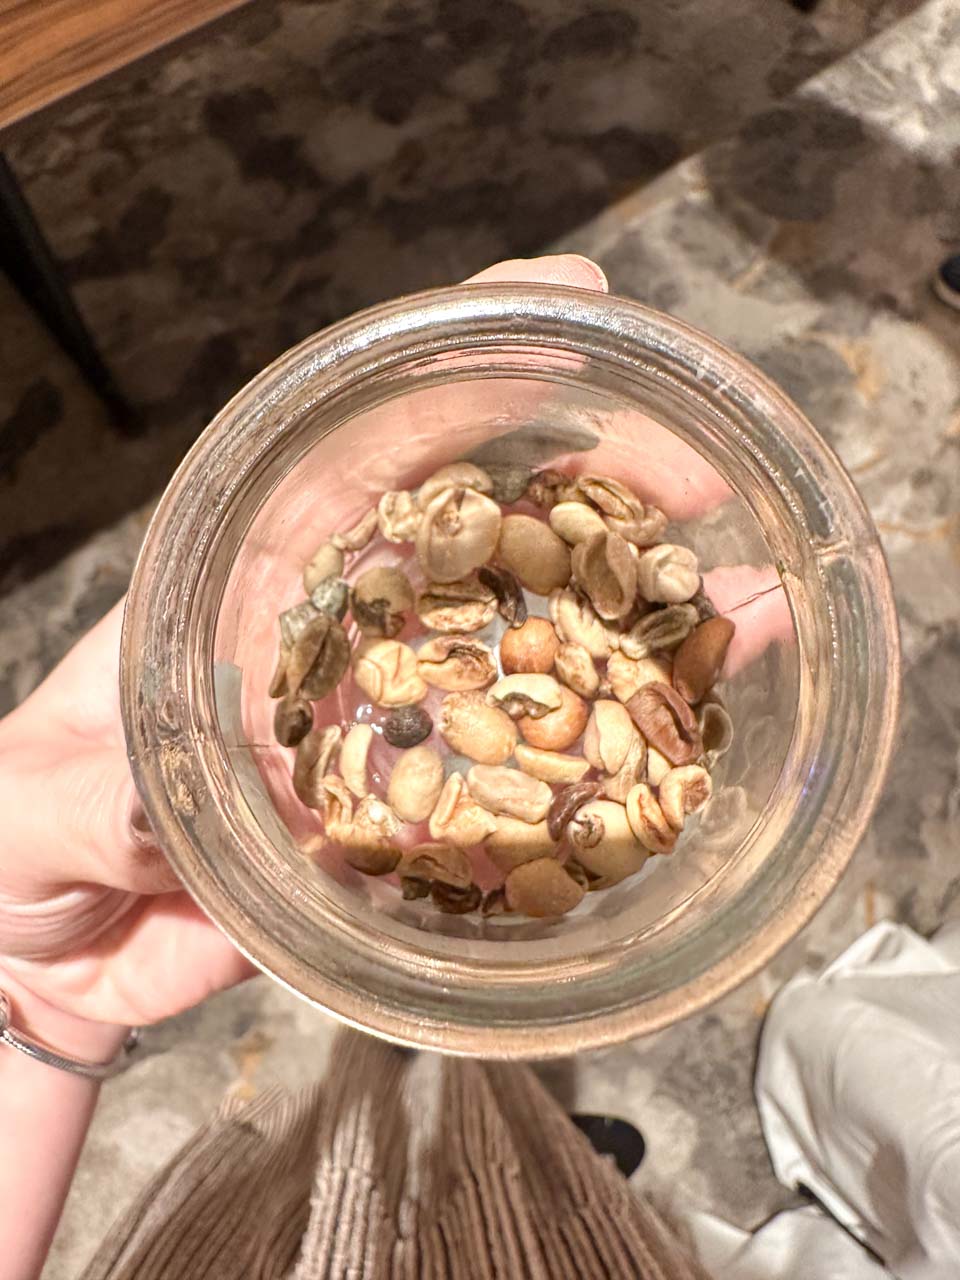 A woman's hand holding a jar with defective coffee beans